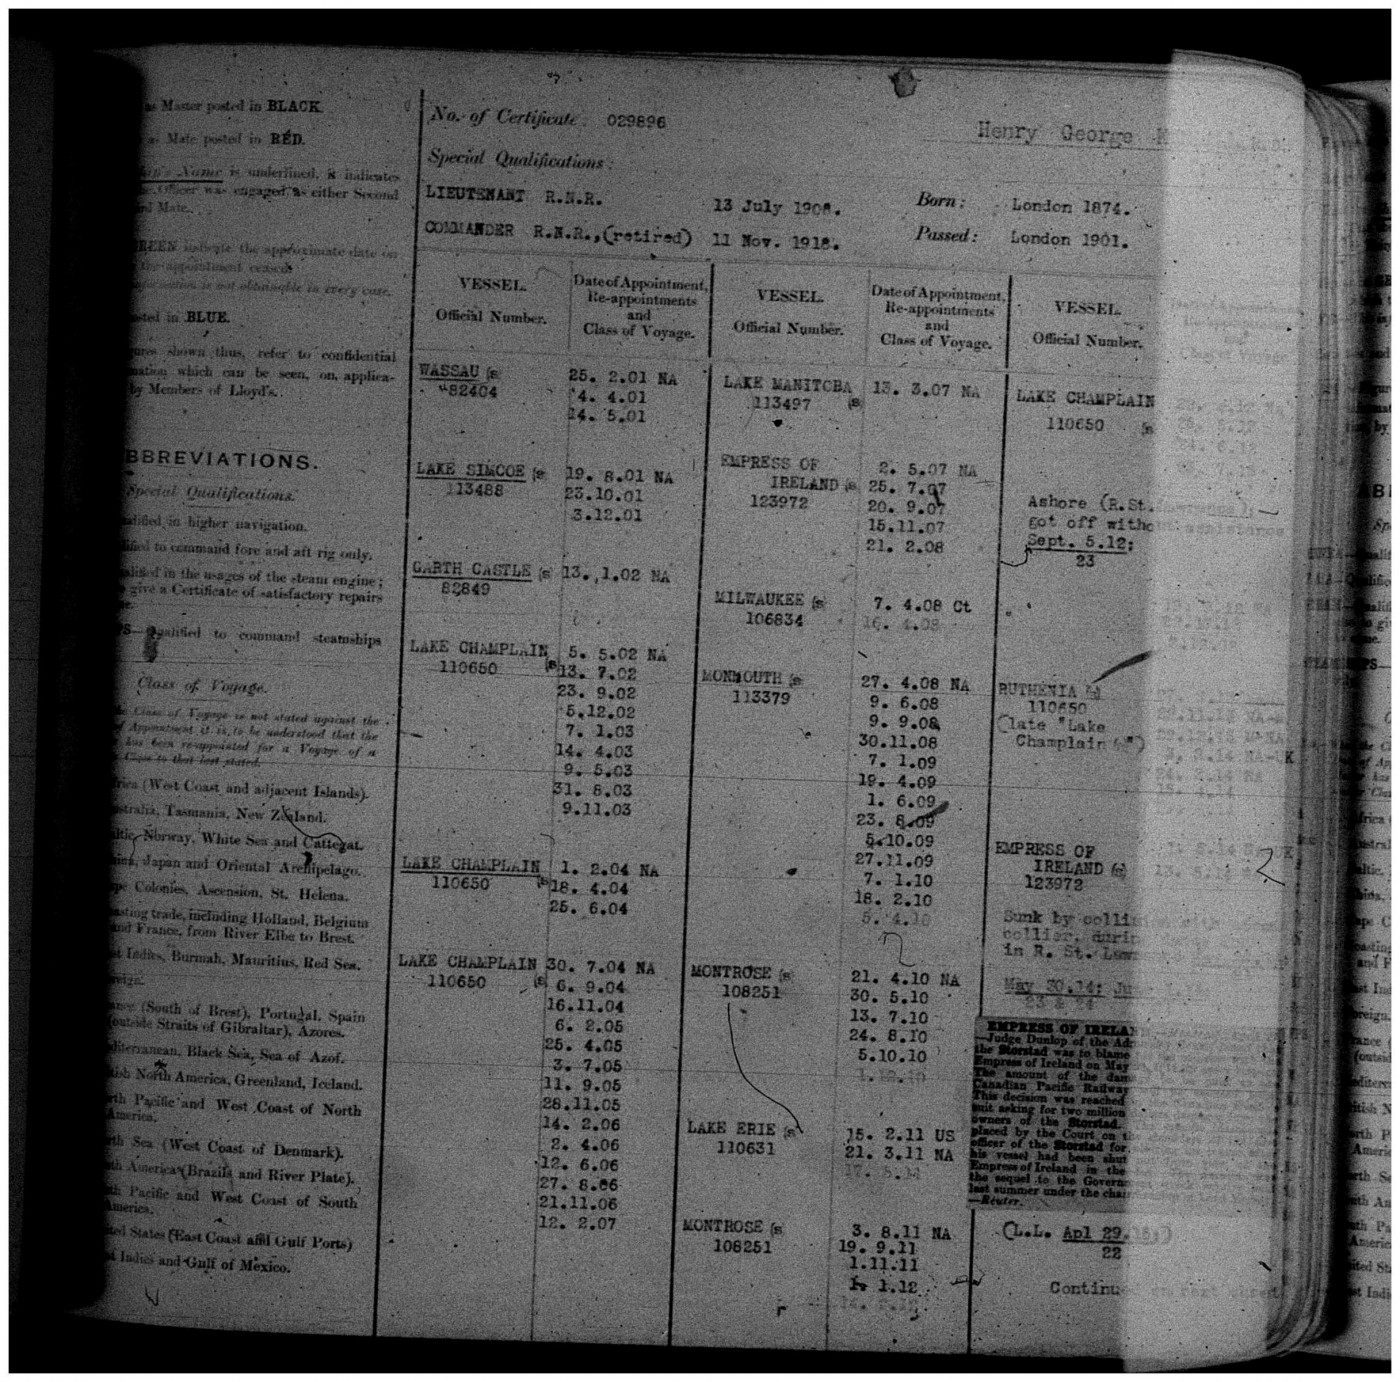 Lloyd’s Captains Register entry for Henry G. Kendall (on microfilm). This resource contained information on the career of captains until retirement, including ship names and routes. Image courtesy of Guildhall Library.